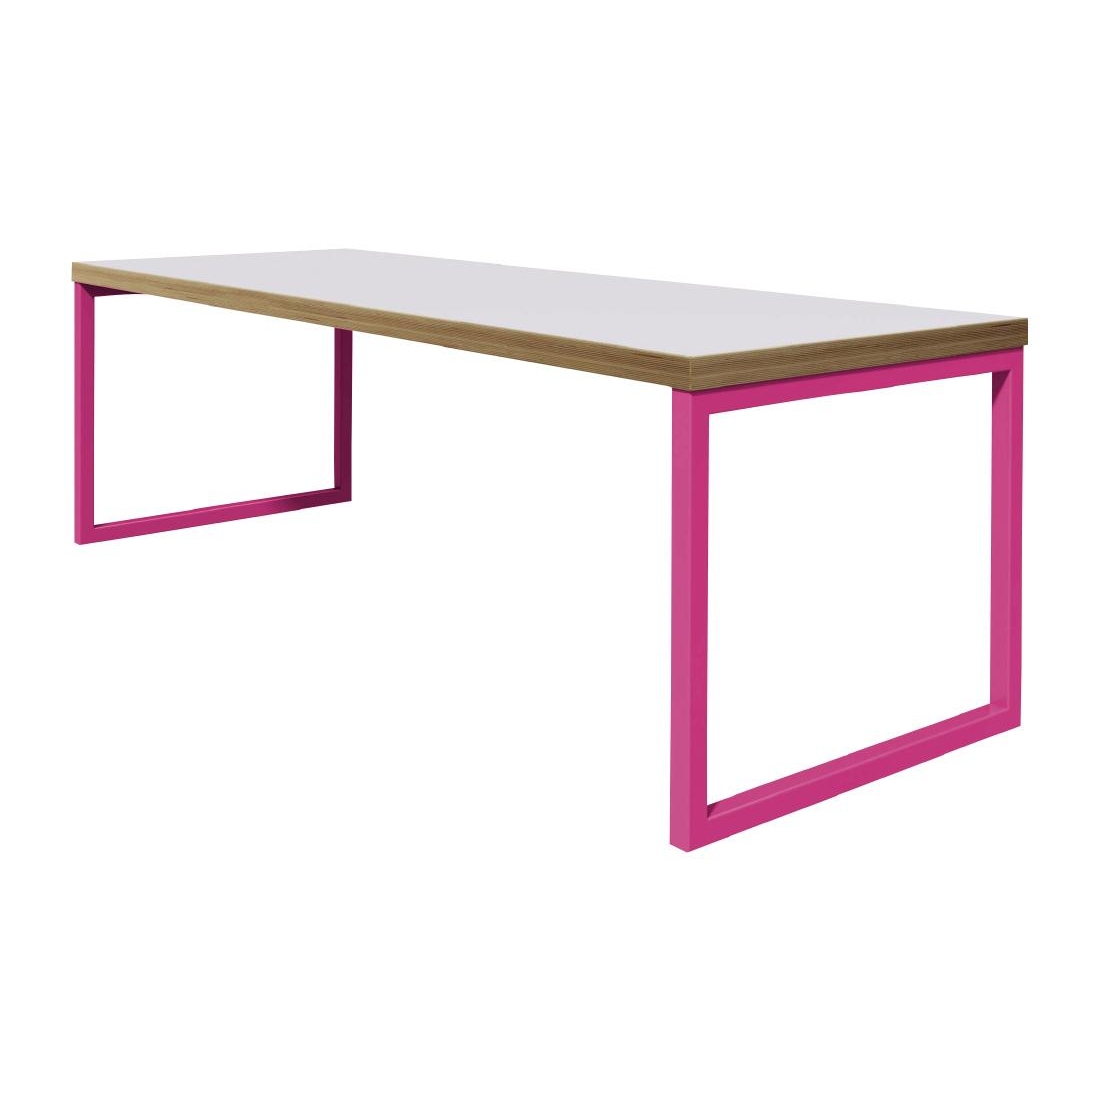 Bolero Dining Table White with Pink Frame 7ft